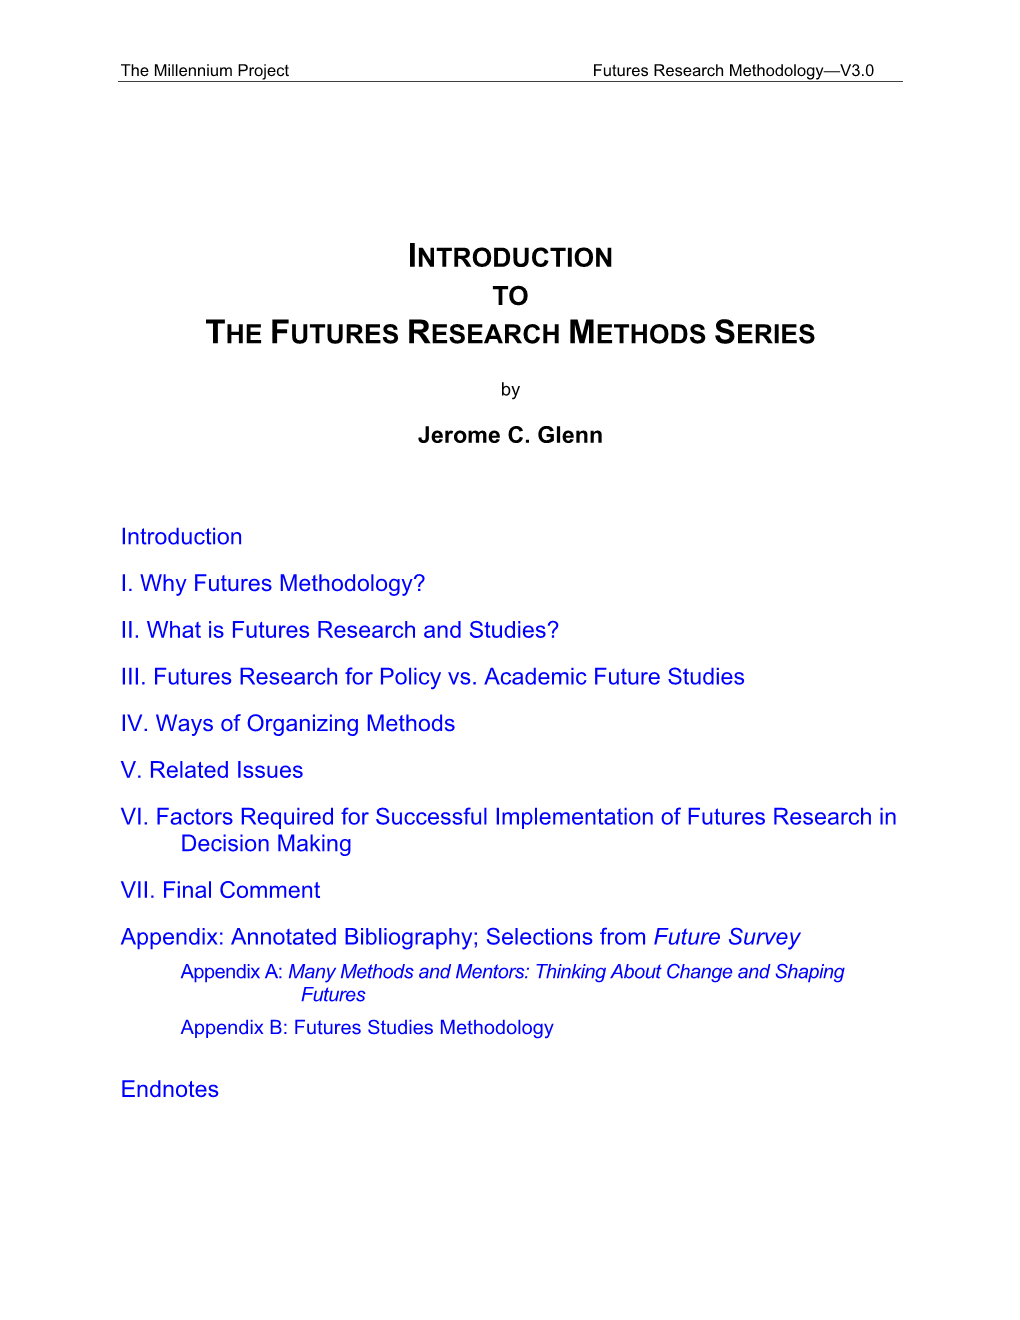 Introduction to the Futures Research Methods Series